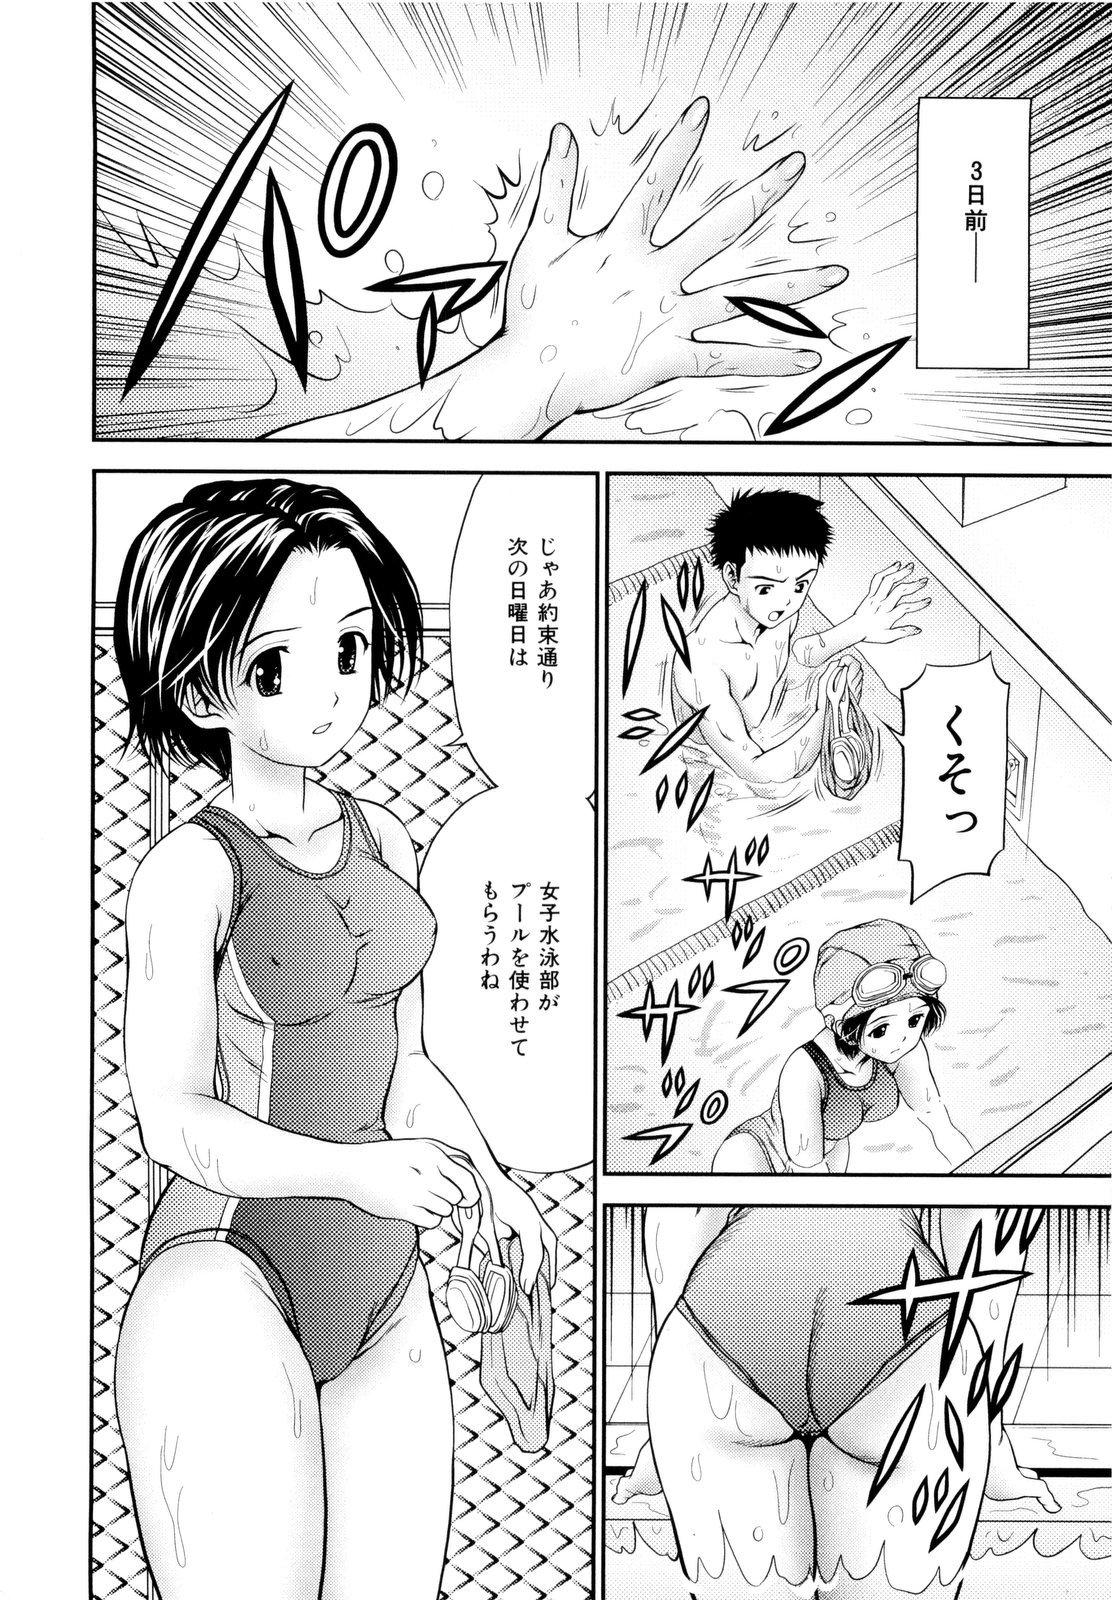 Lesbians Imouto Bloomer Fuck For Cash - Page 11